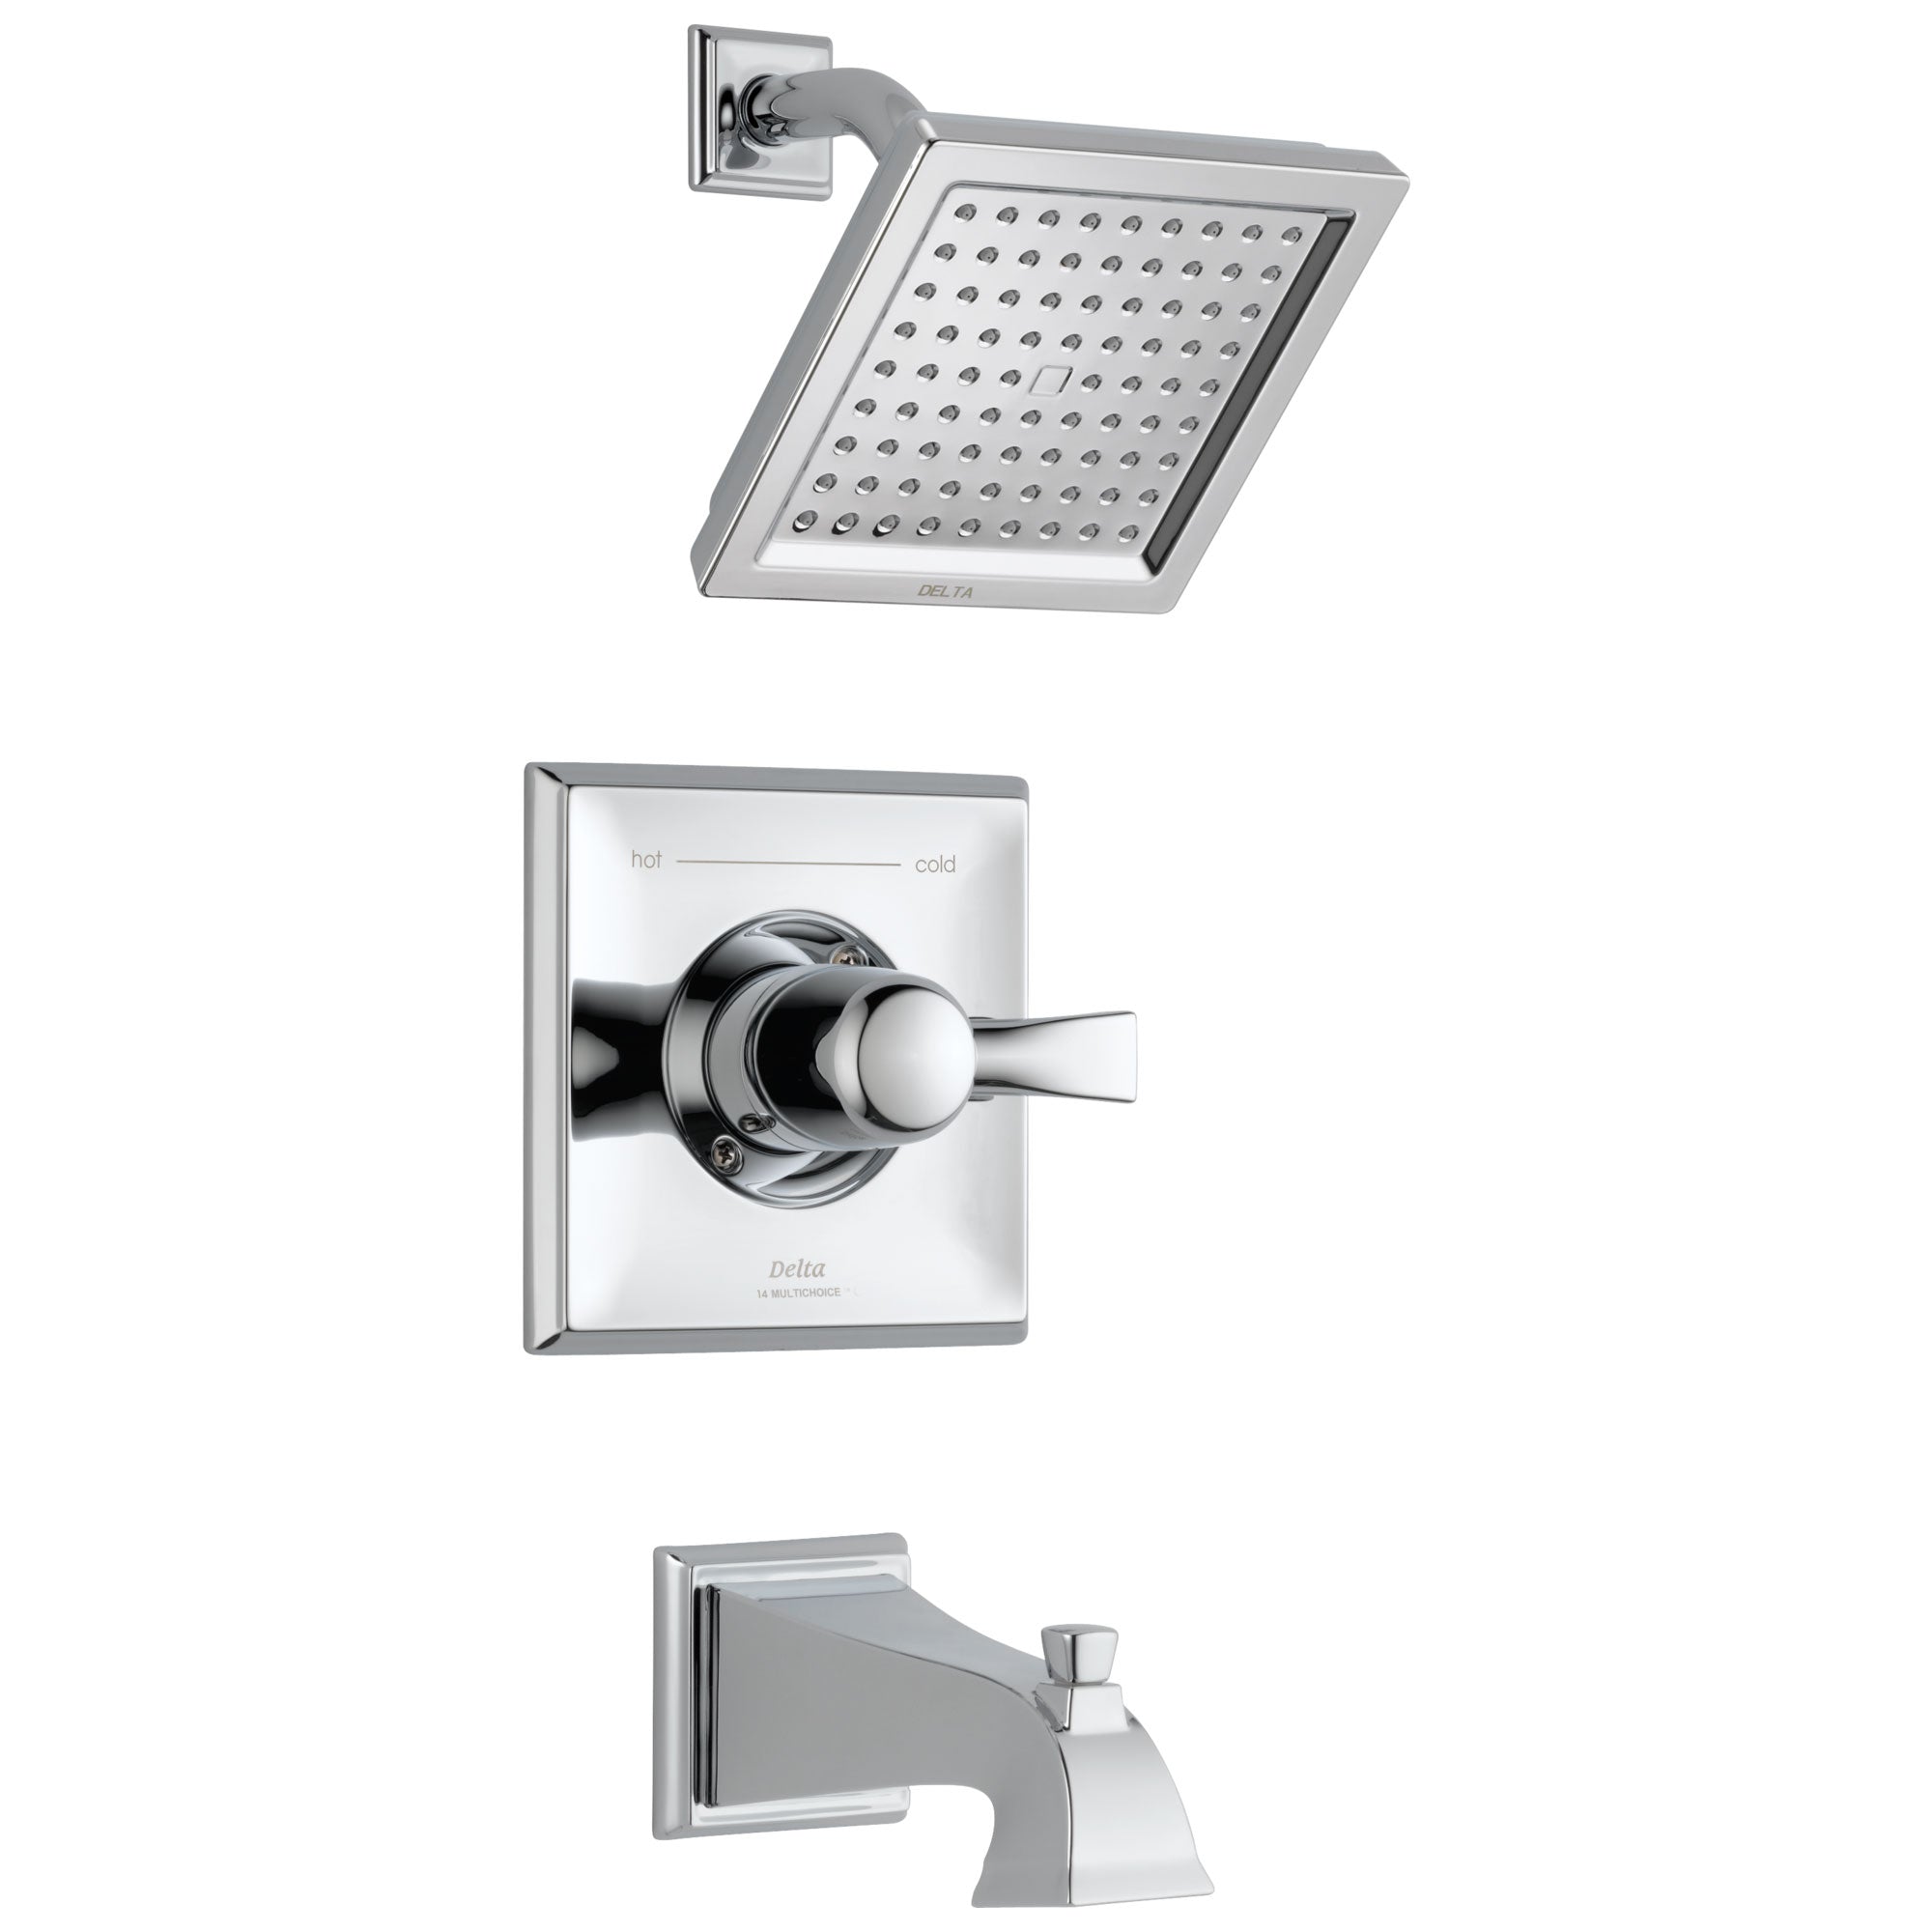 Delta Dryden Collection Chrome Finish Monitor 14 Series Water Efficient 1.75 GPM Tub and Shower Faucet Trim Kit Includes Rough-in Valve without Stops D2407V